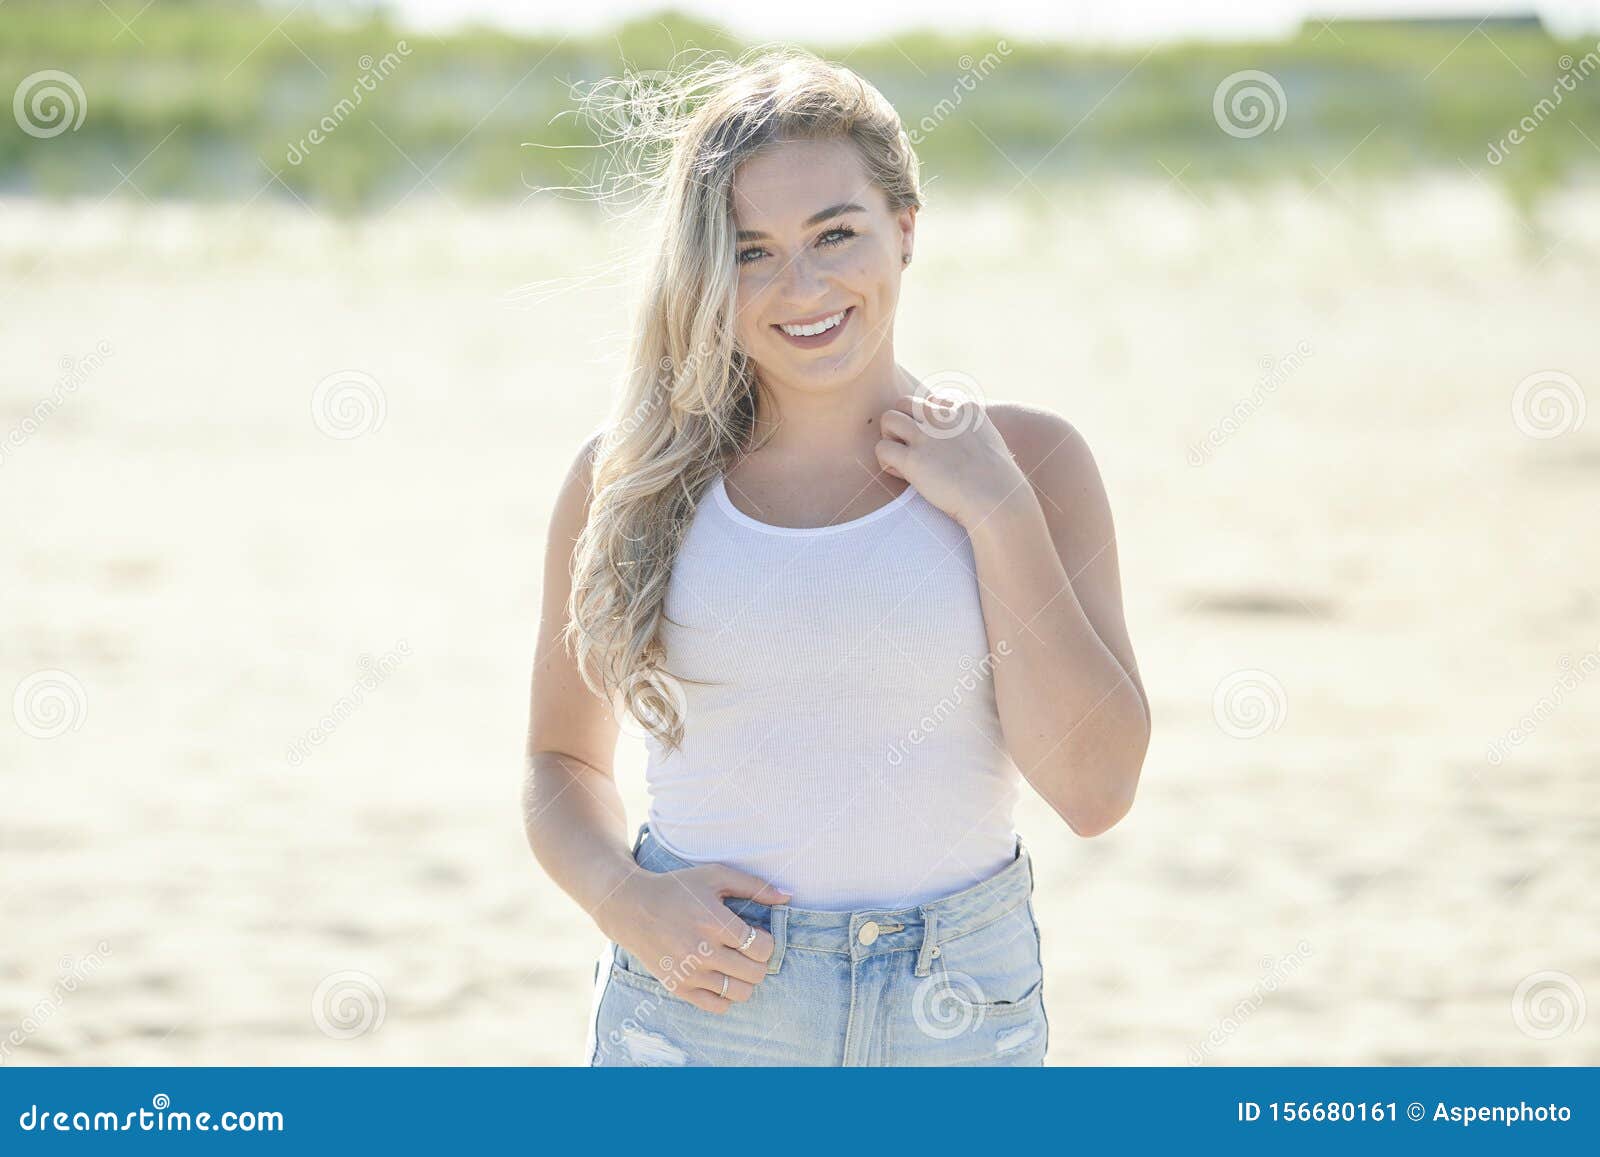 Premium Photo | A beautiful young brunette woman in jeans walks along a  picturesque sandy beach